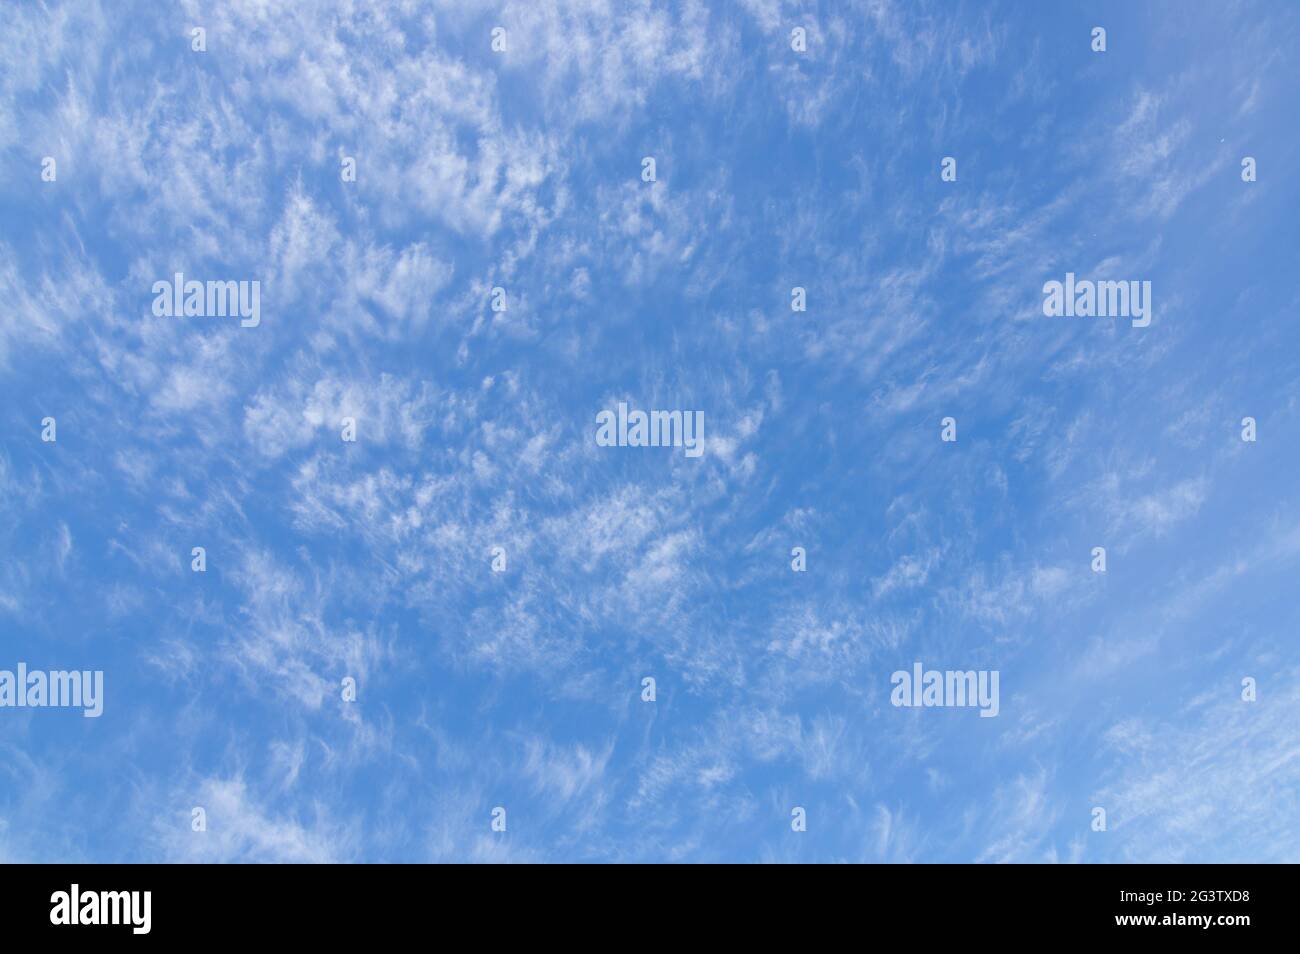 Blue sky with misty clouds for background, sky or texture Stock Photo